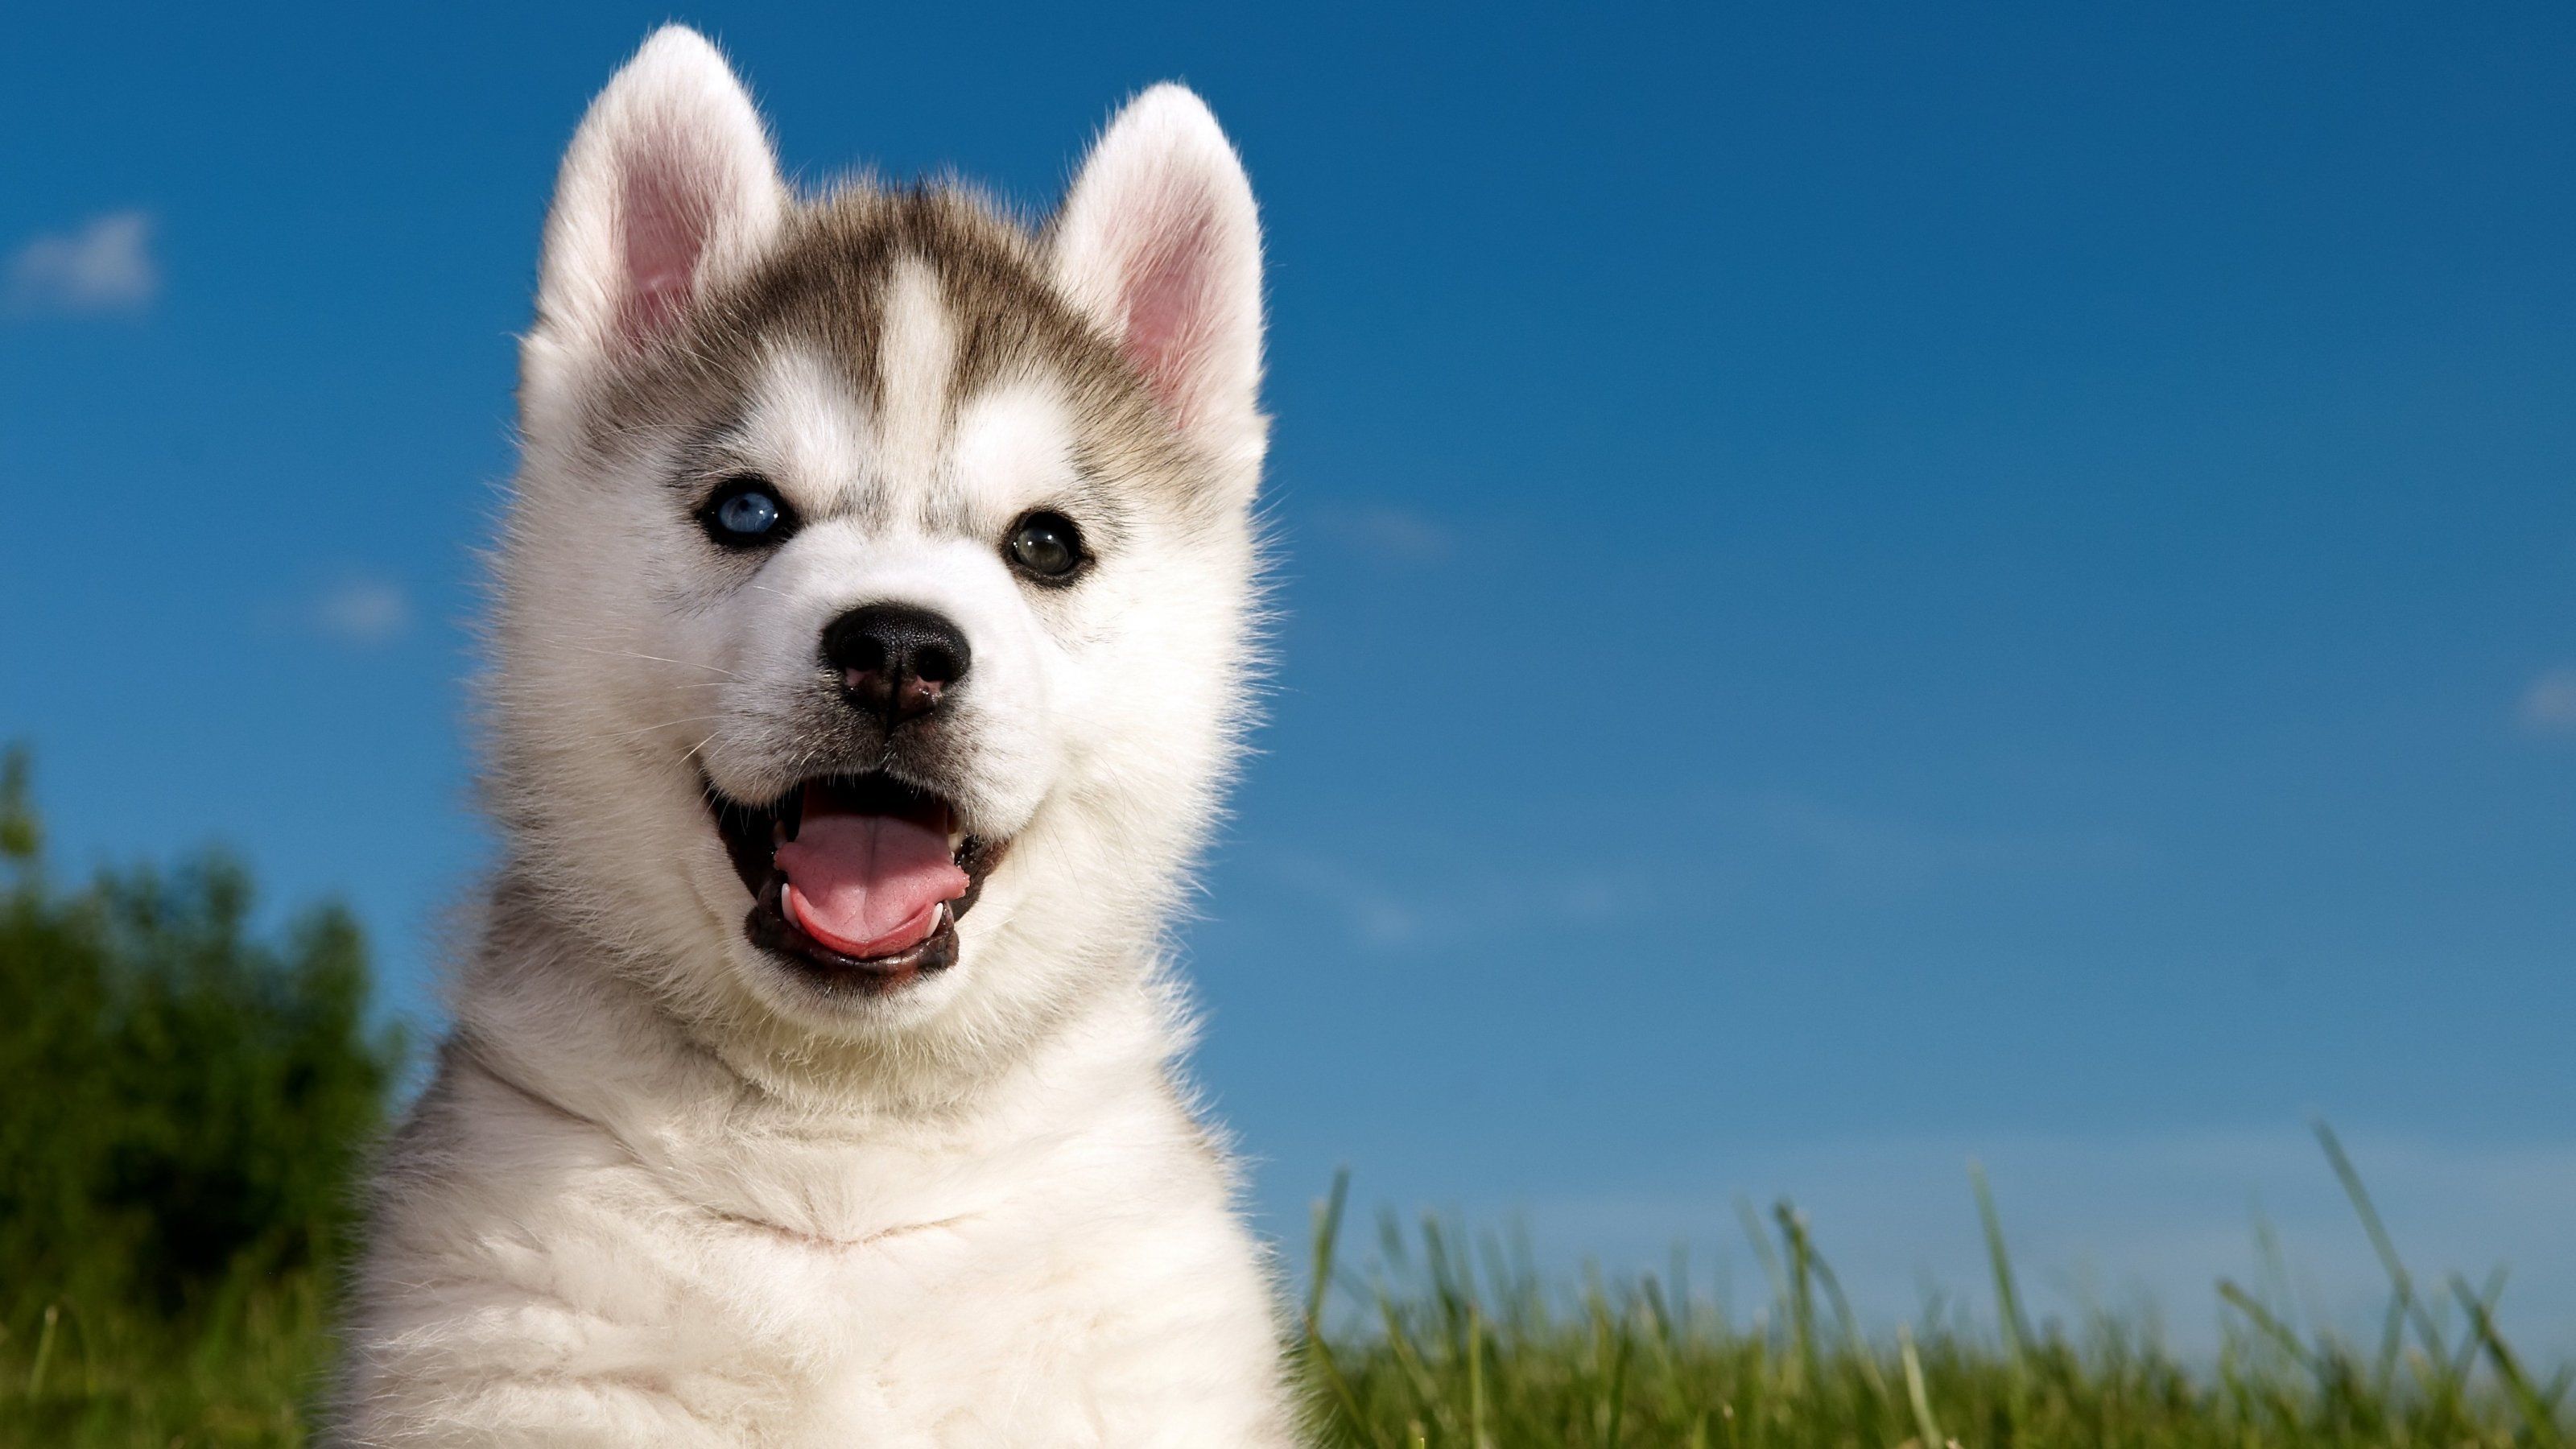 Husky 4K wallpaper for your desktop or mobile screen free and easy to download